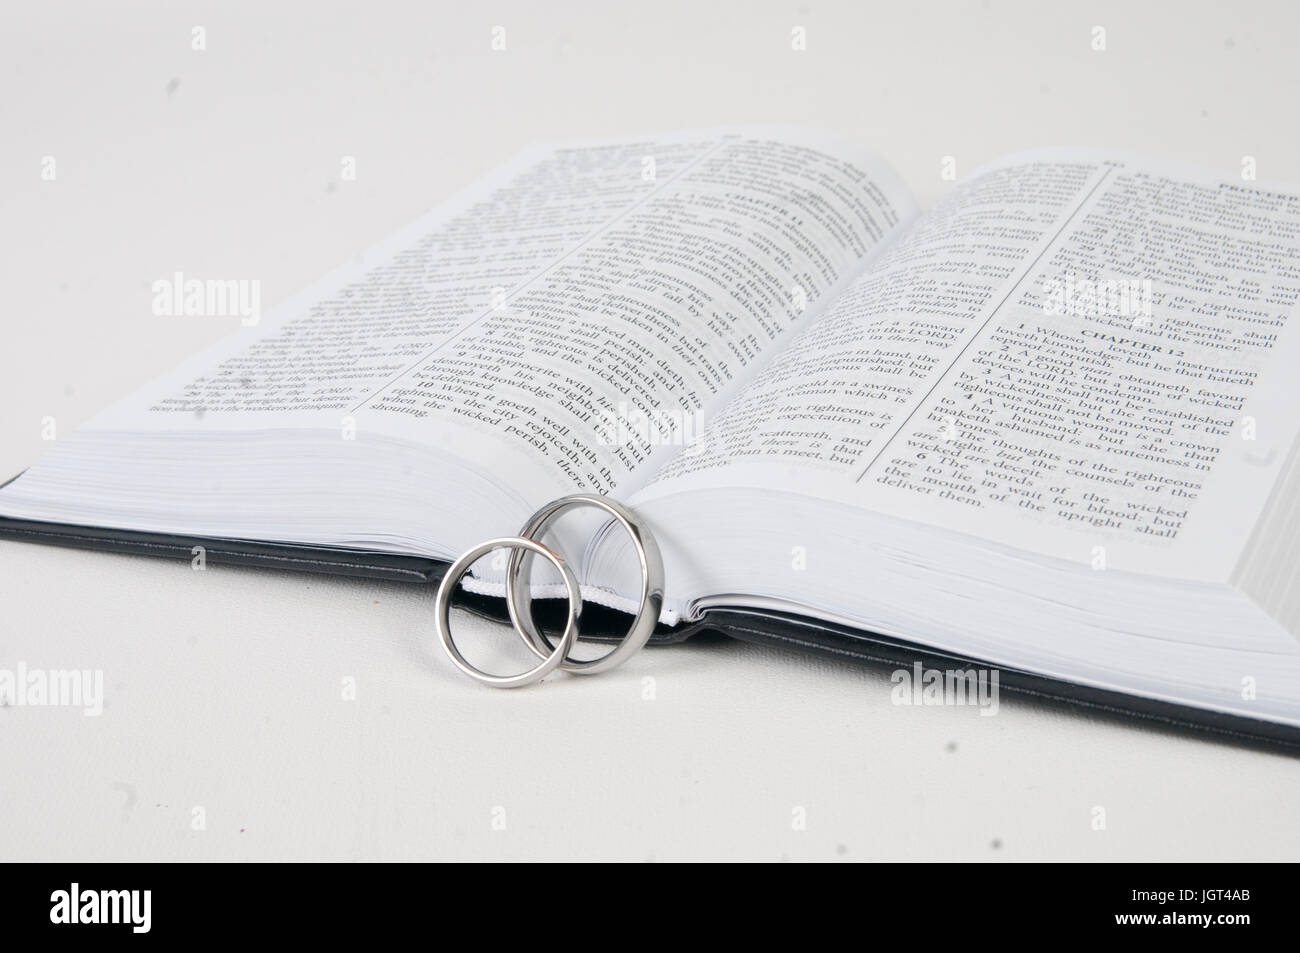 Wedding rings on bible. Marriage and faith make a perfect combination. Stock Photo